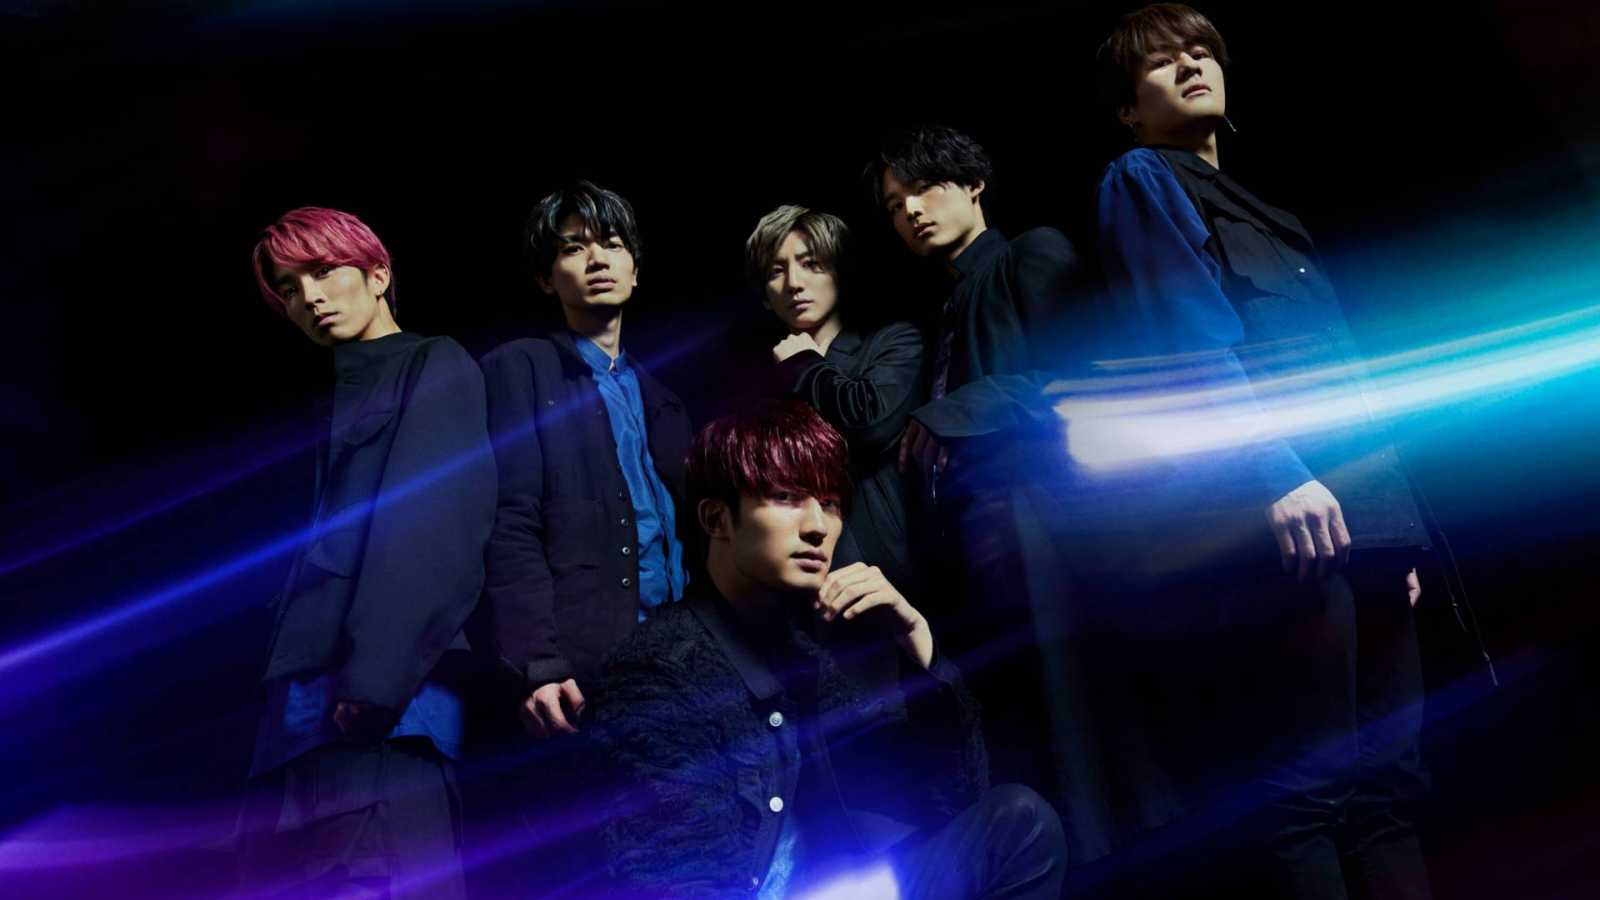 New Single from SixTONES © SixTONES. All rights reserved.